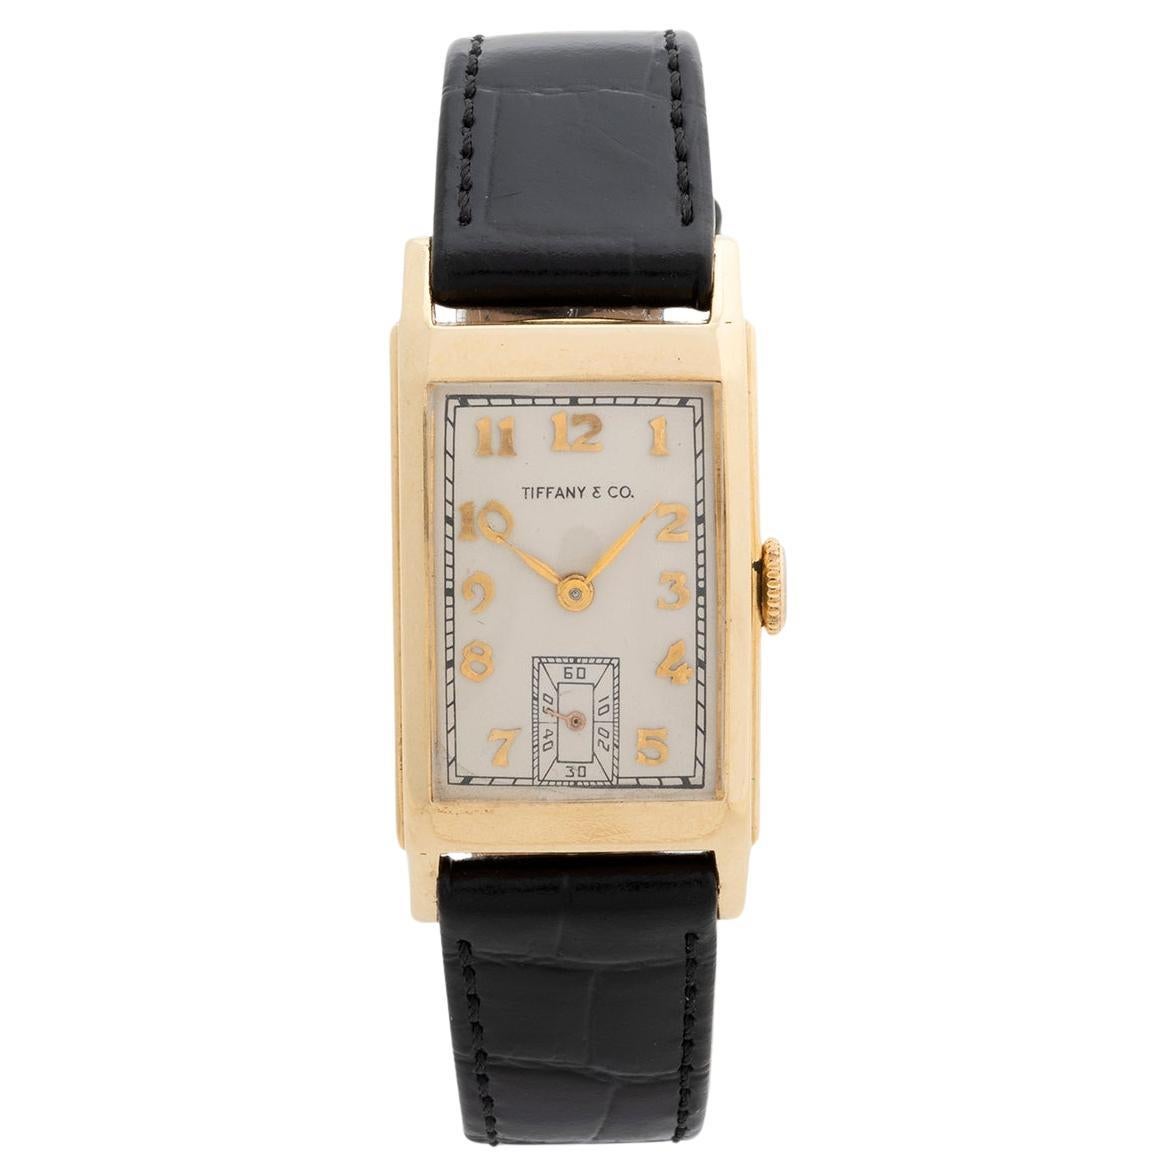 Hamilton for Tiffany & Co Dresswatch, 14K Yellow Gold, Cal 982 Mmt, Year 1941.  For Sale